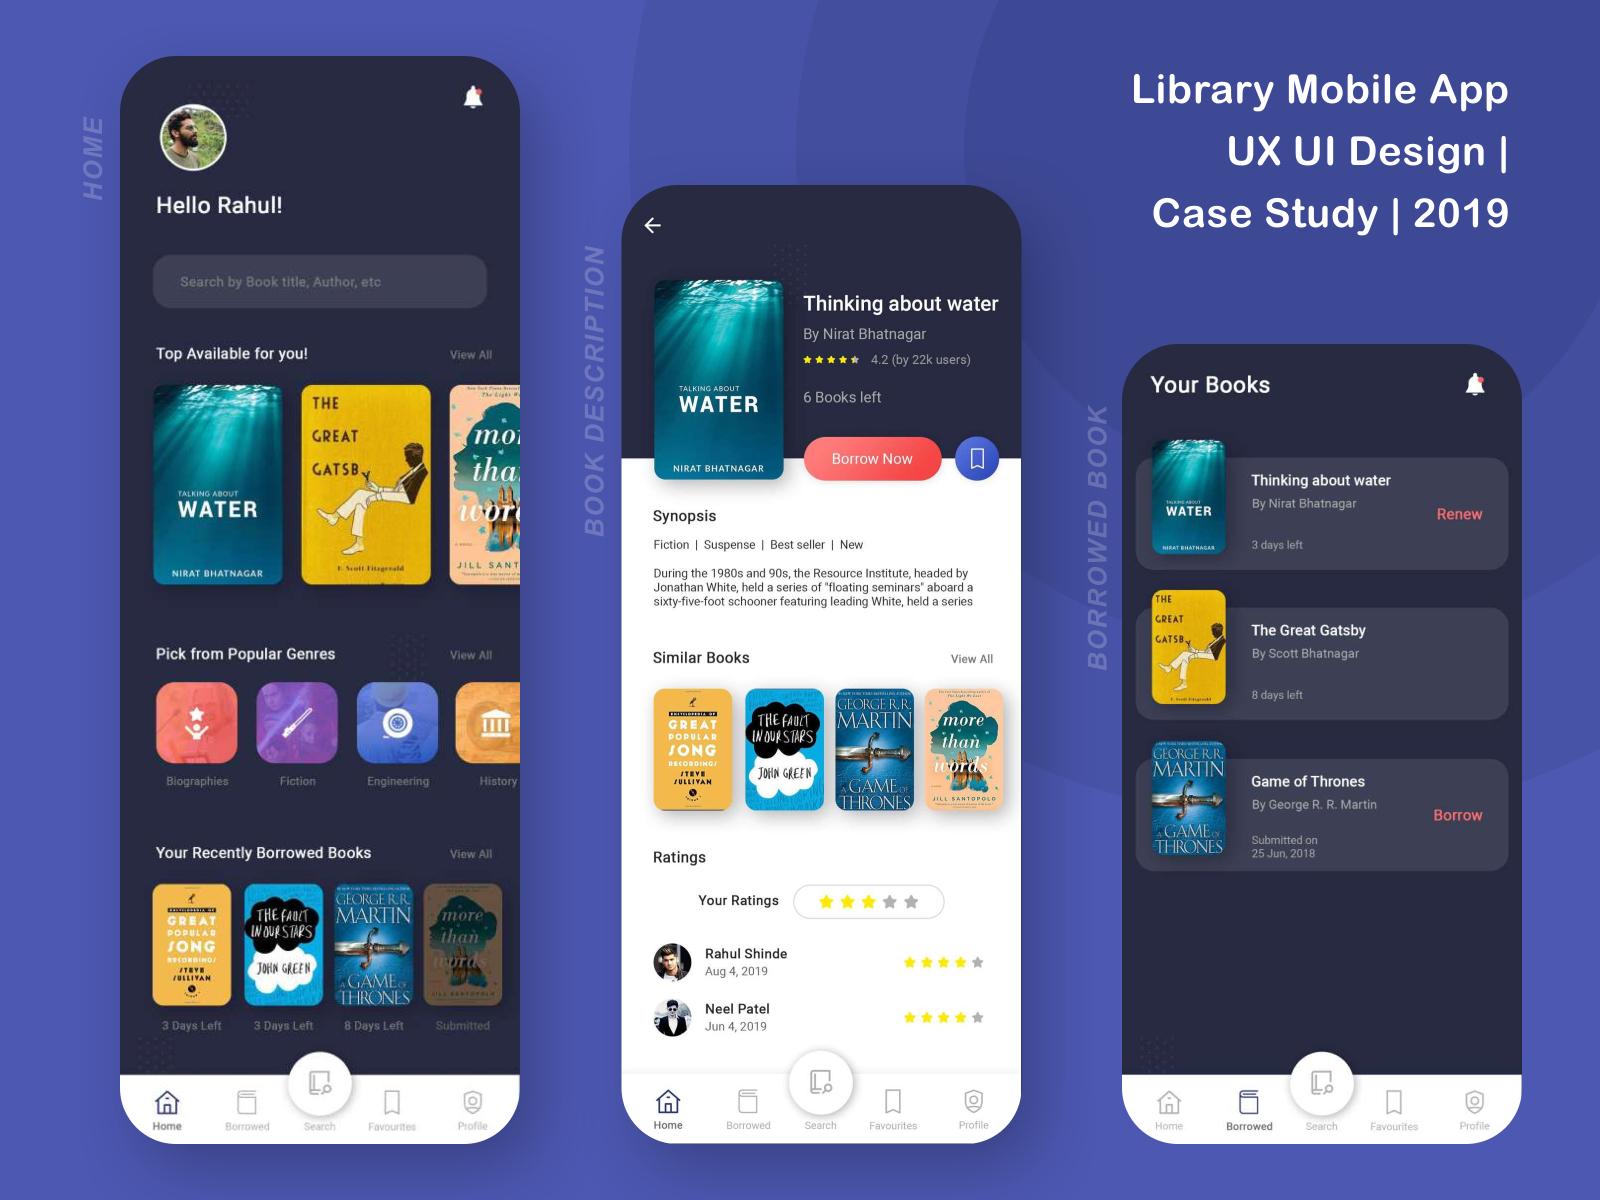 Library Mobile App | UX UI Design Case Study by Rahul ...